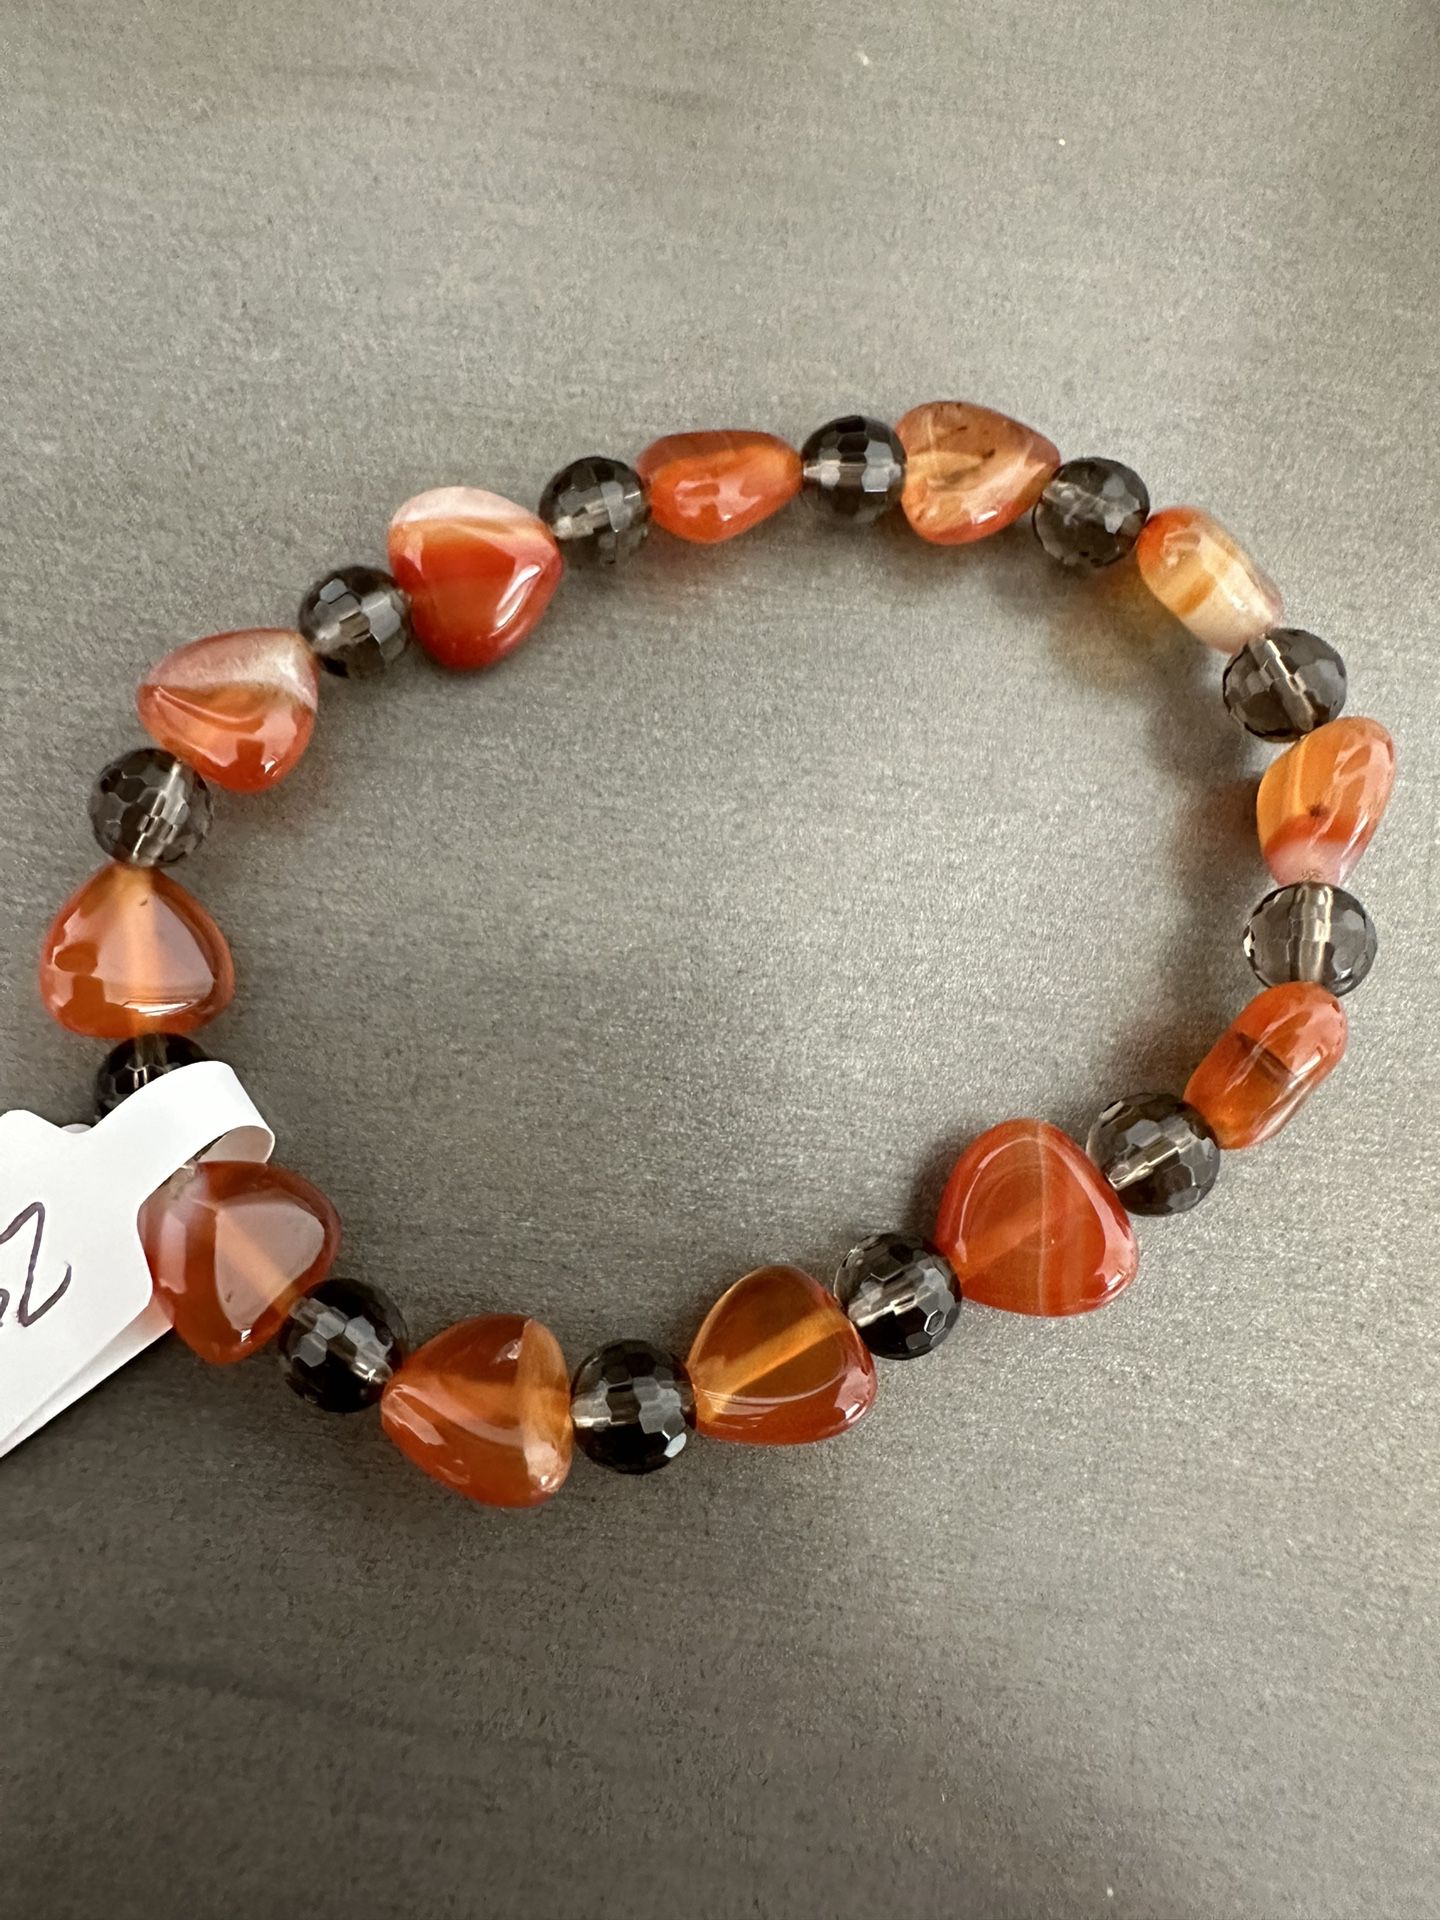 New, Beautiful Carnelian Hearts And Faceted Smoky Quartz Crystal Bracelet. Jewelry Bag Included.